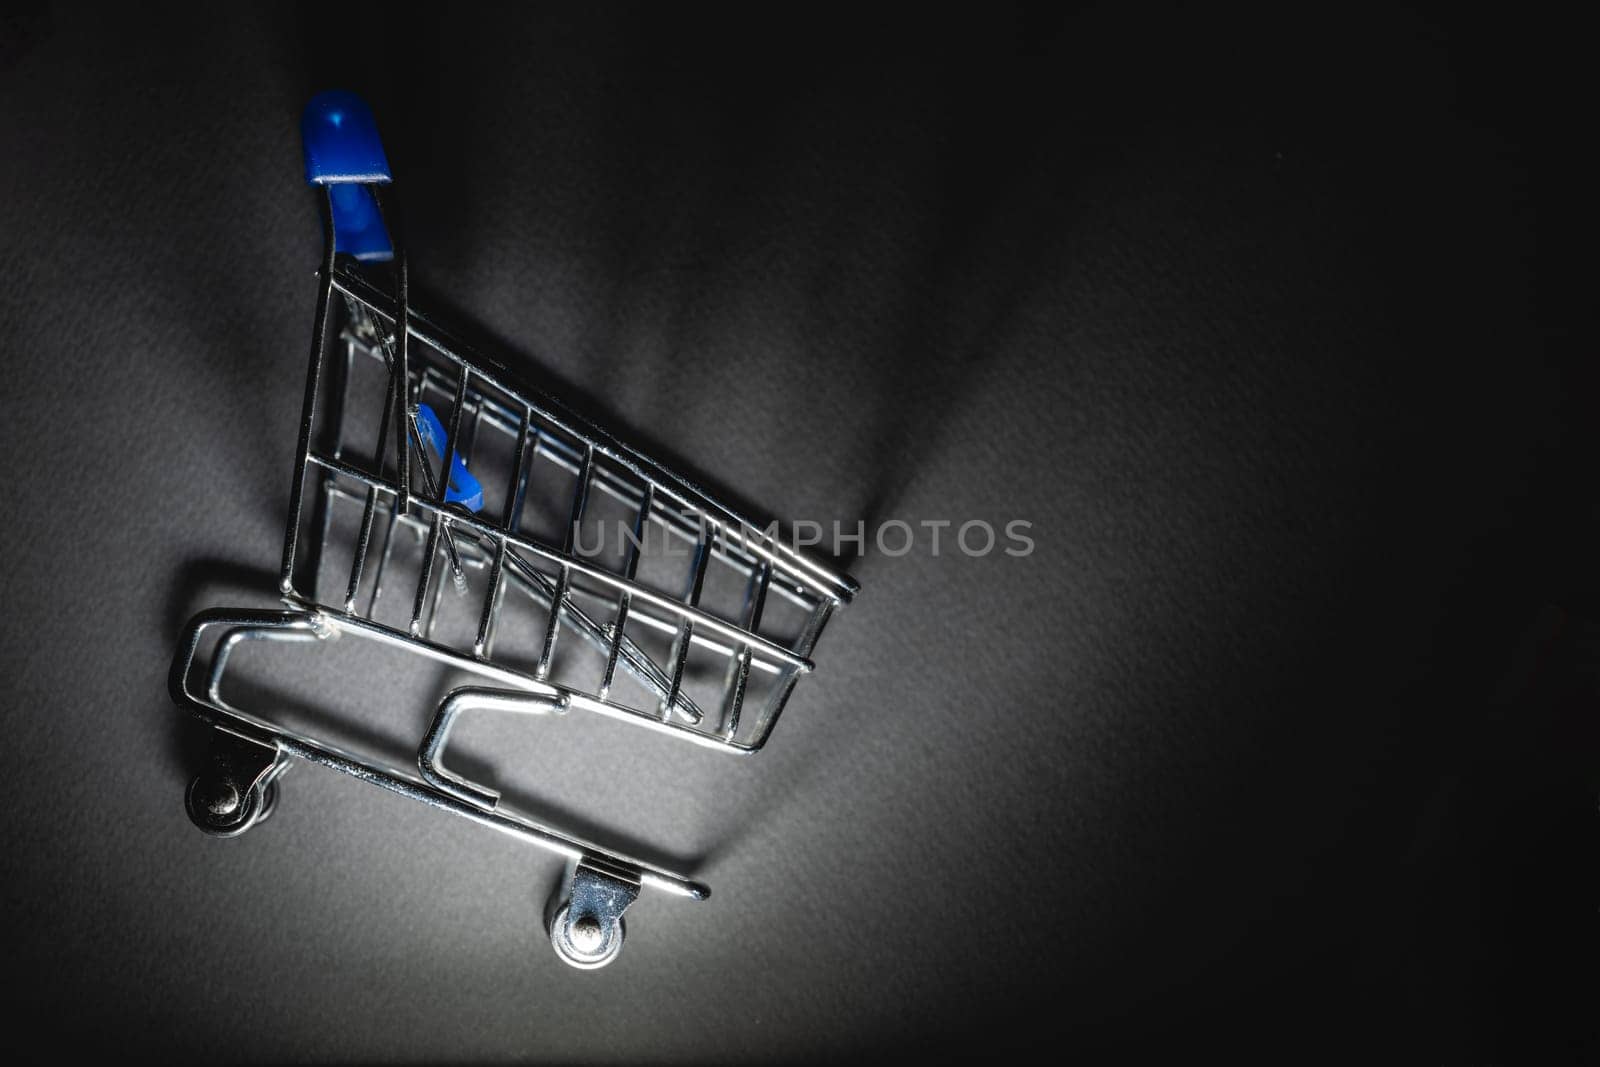 Supermarket cart with spotlight on it on a dark background by Sonat